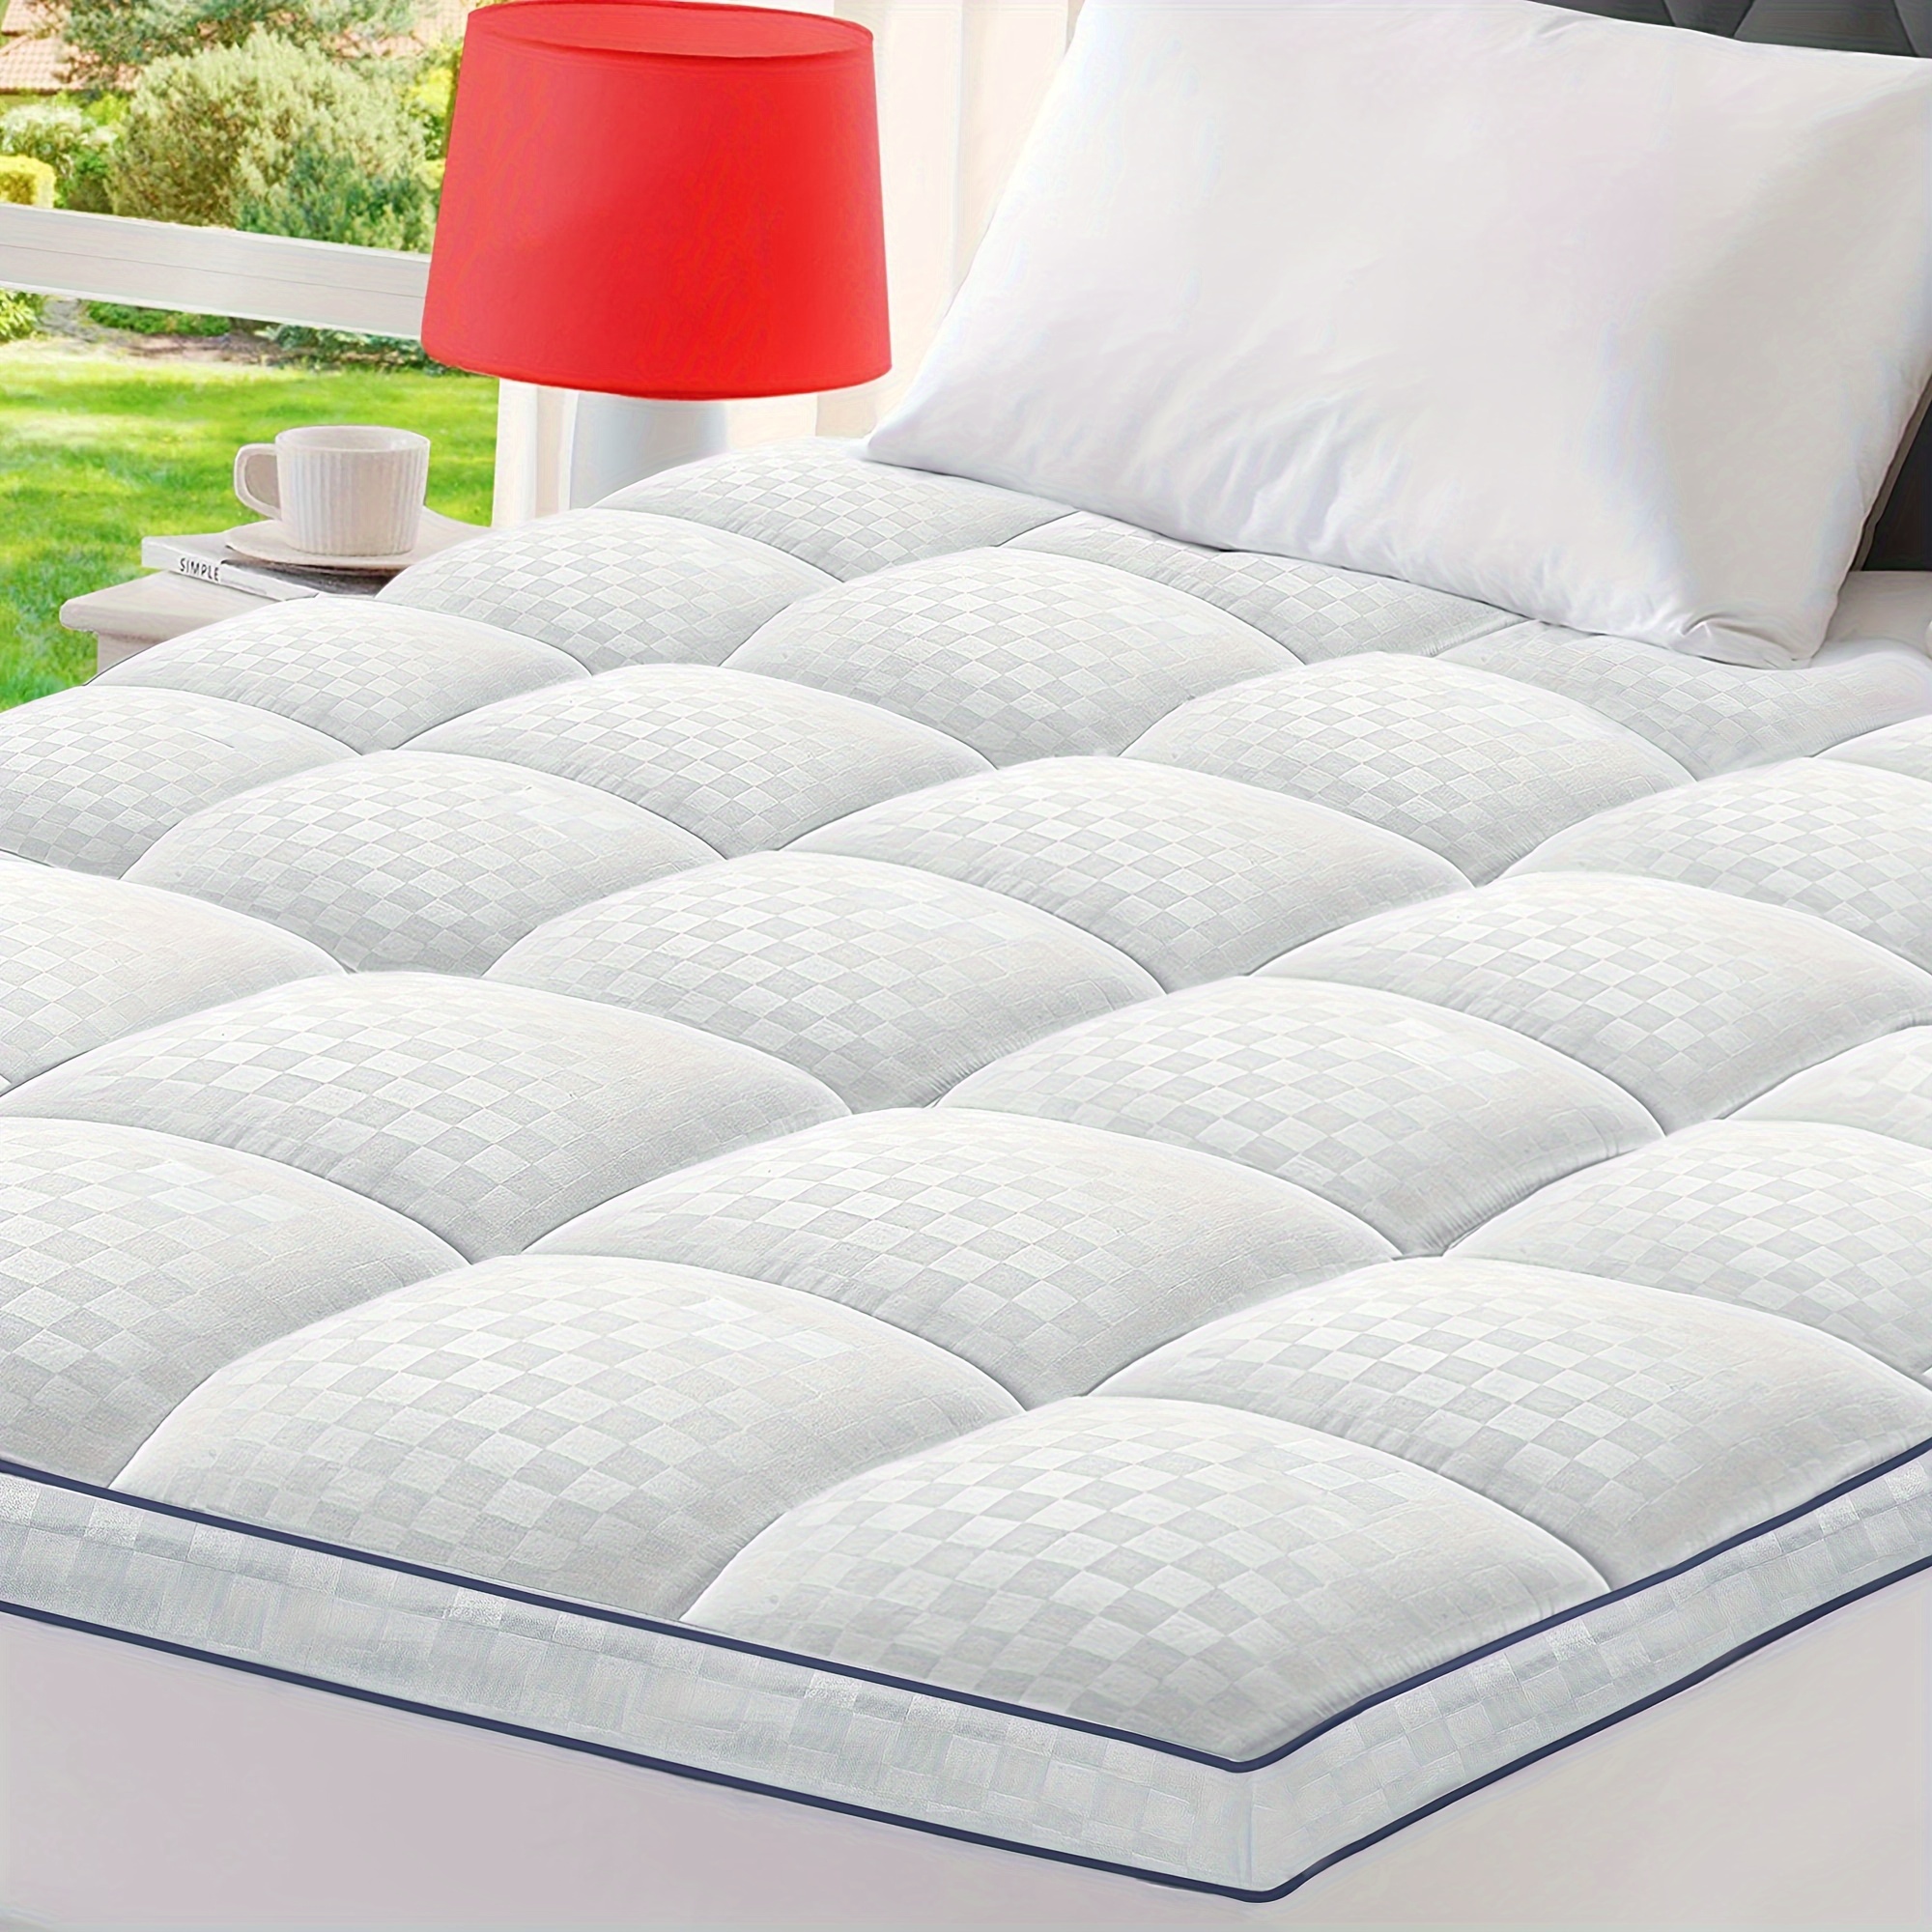 

Mattress Topper Pillow Top Extra Thick 900gsm Cooling Quilted Mattress Pad Cover For With 8-21 Inch Deep Pocket 3d Snow Down Alternative Fill